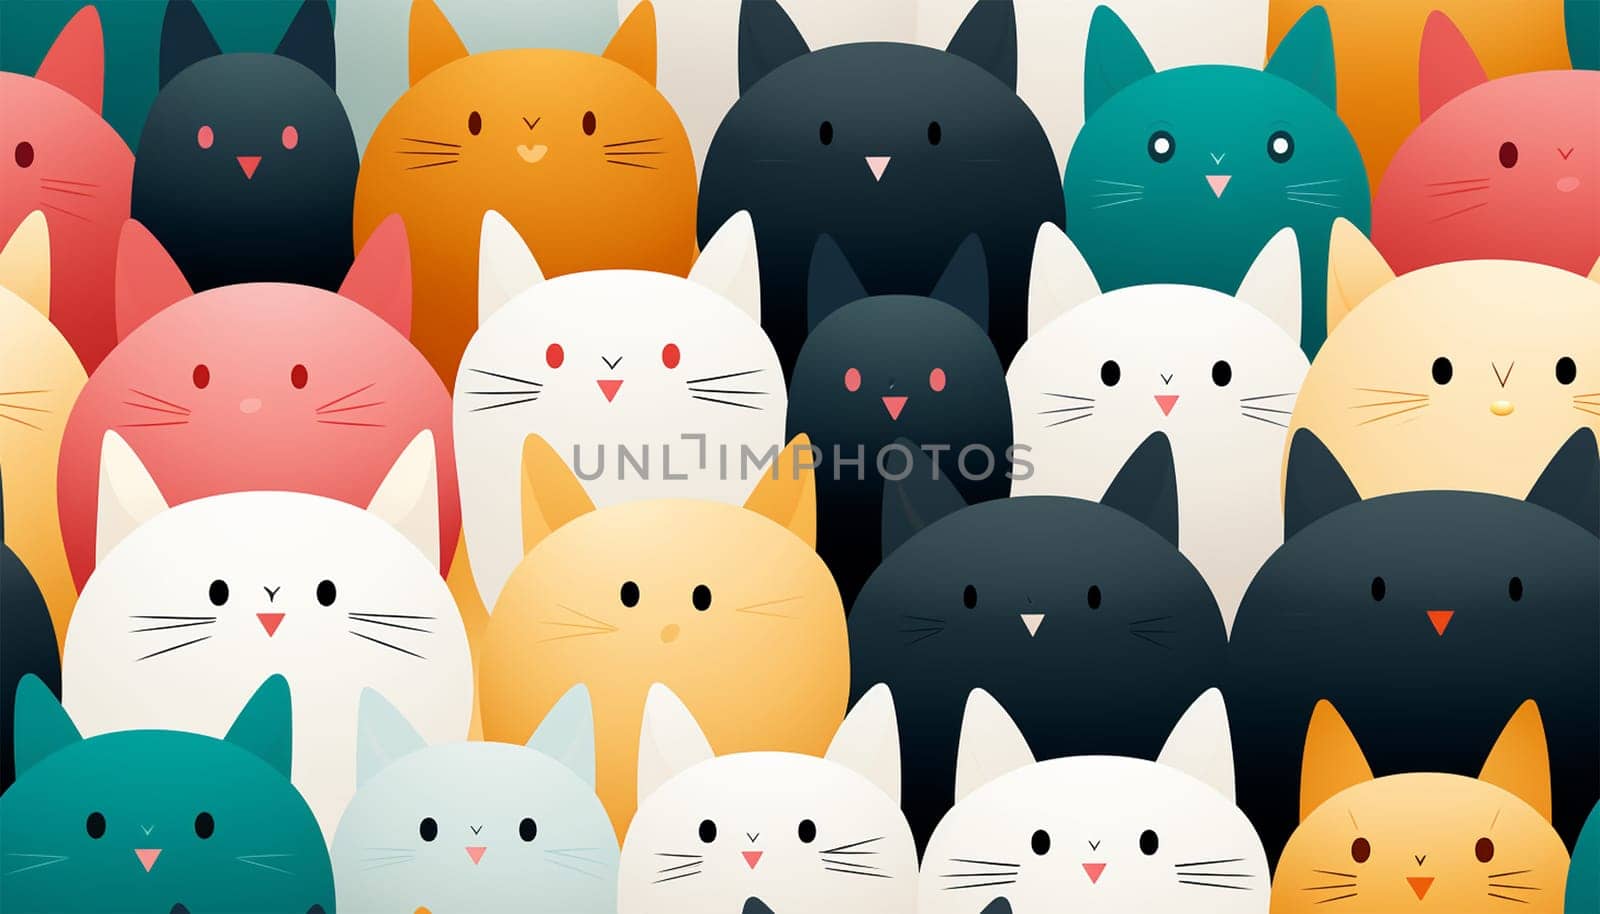 Cute cats Kawaii kittens funny .Seamless pattern of cute colorful cat cartoon.Happy meow.Animals character design.Image for card,poster,baby clothing.Kawaii.Colorful Illustration. by Annebel146